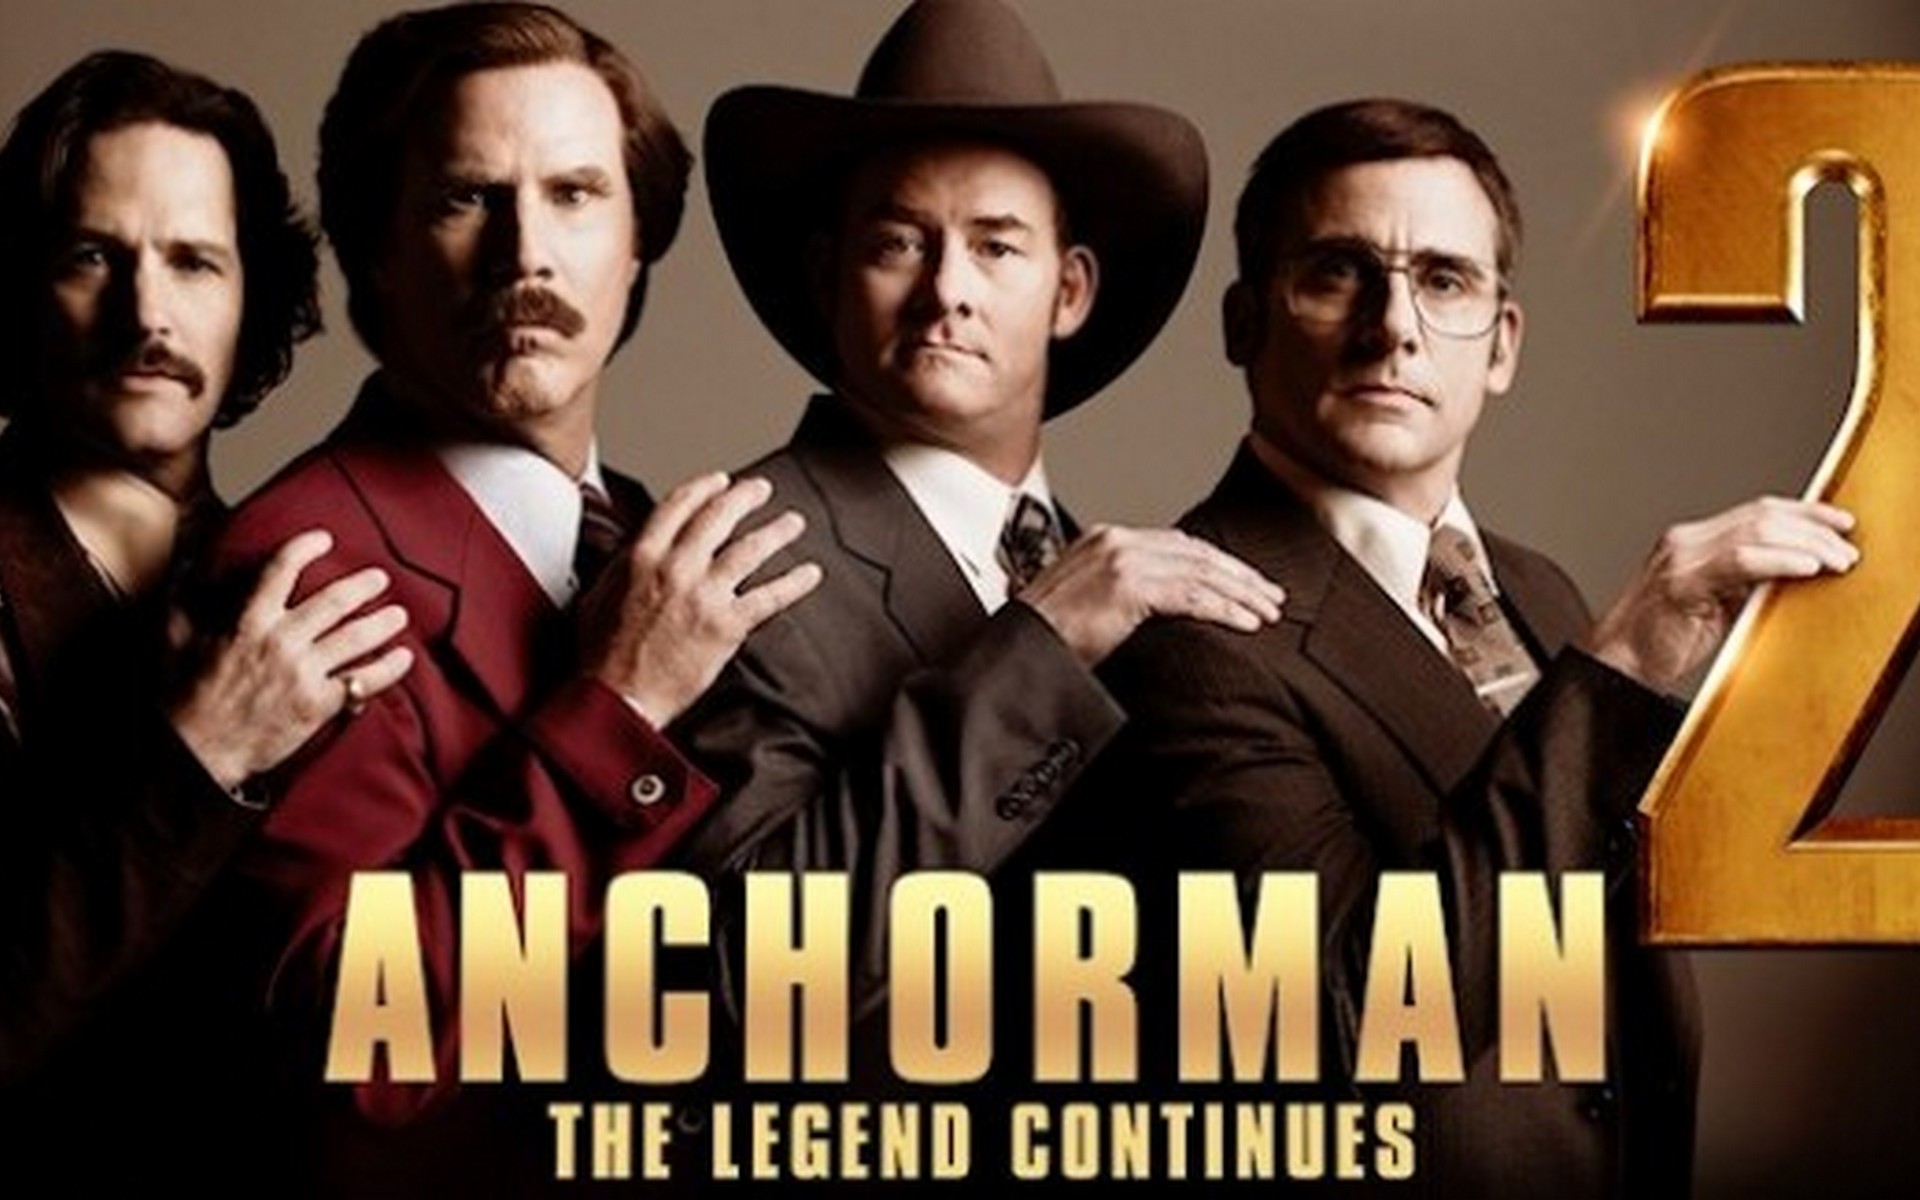 Anchorman 2 The Legend Continues (2013) - Wallpaper, High Definition, High Quality ...1920 x 1200